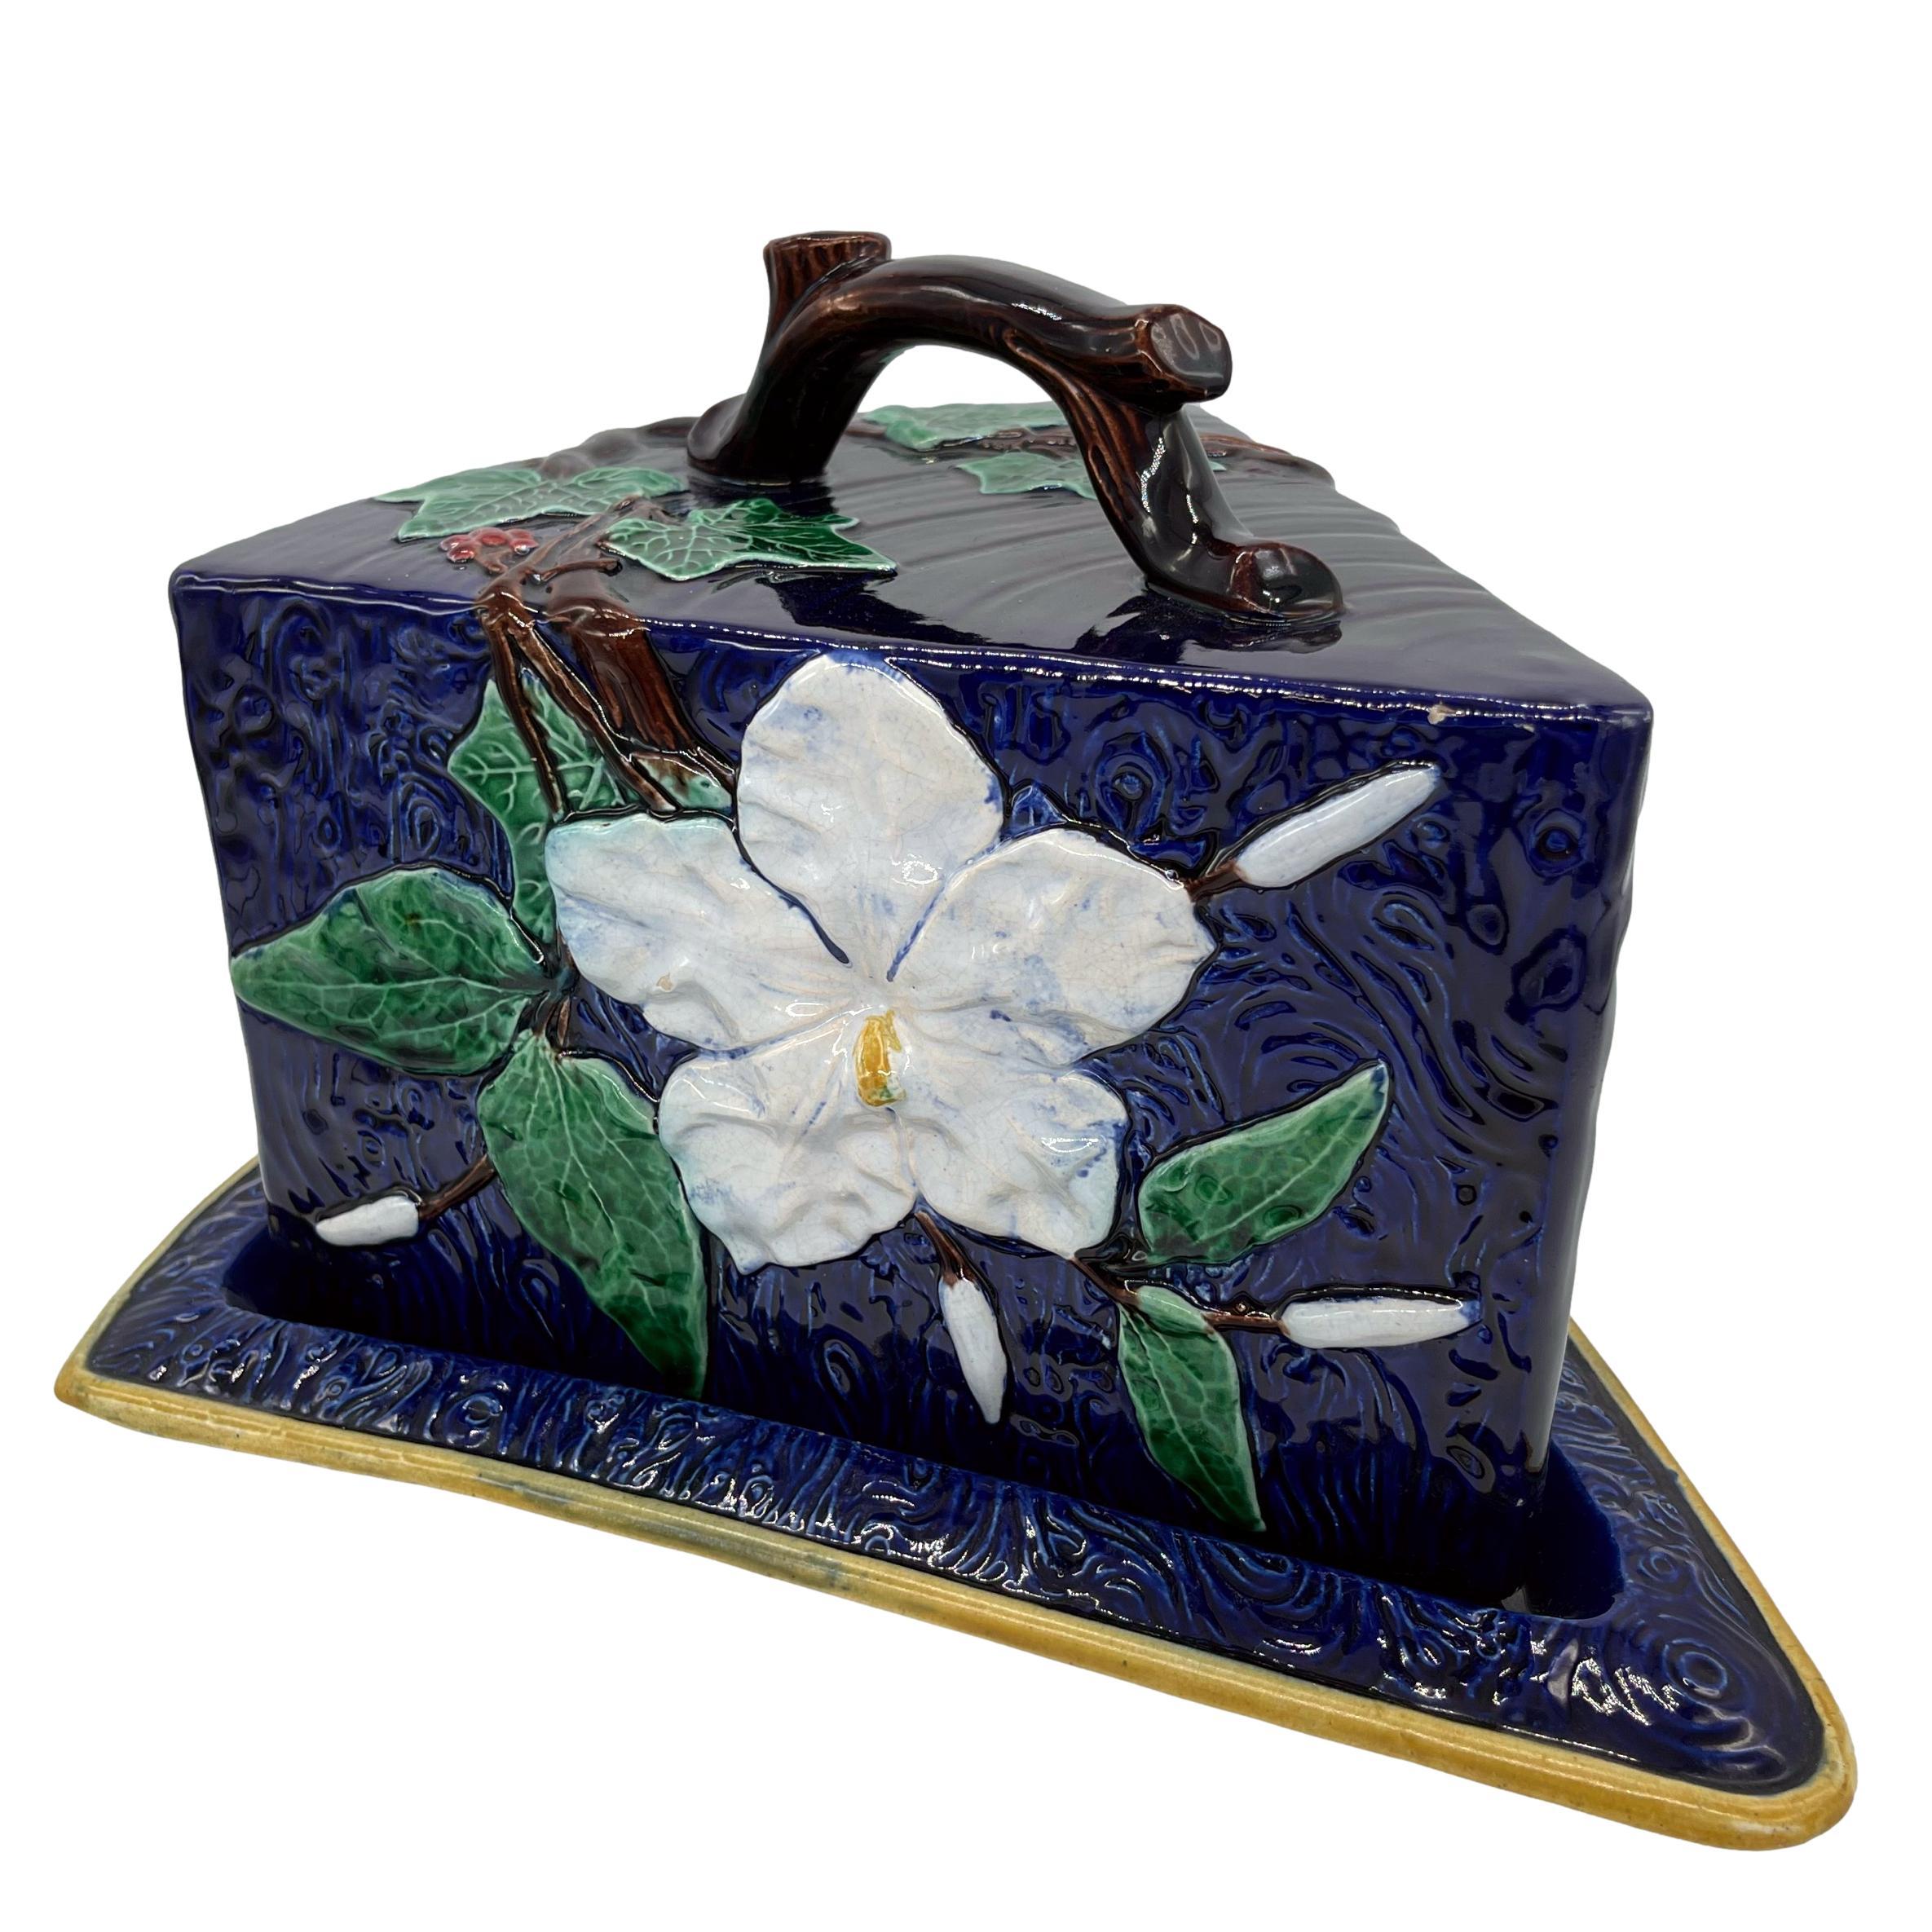 19th Century English Majolica Cheese Wedge Dome & Stand, Flowers, Ivy on Cobalt, ca. 1875